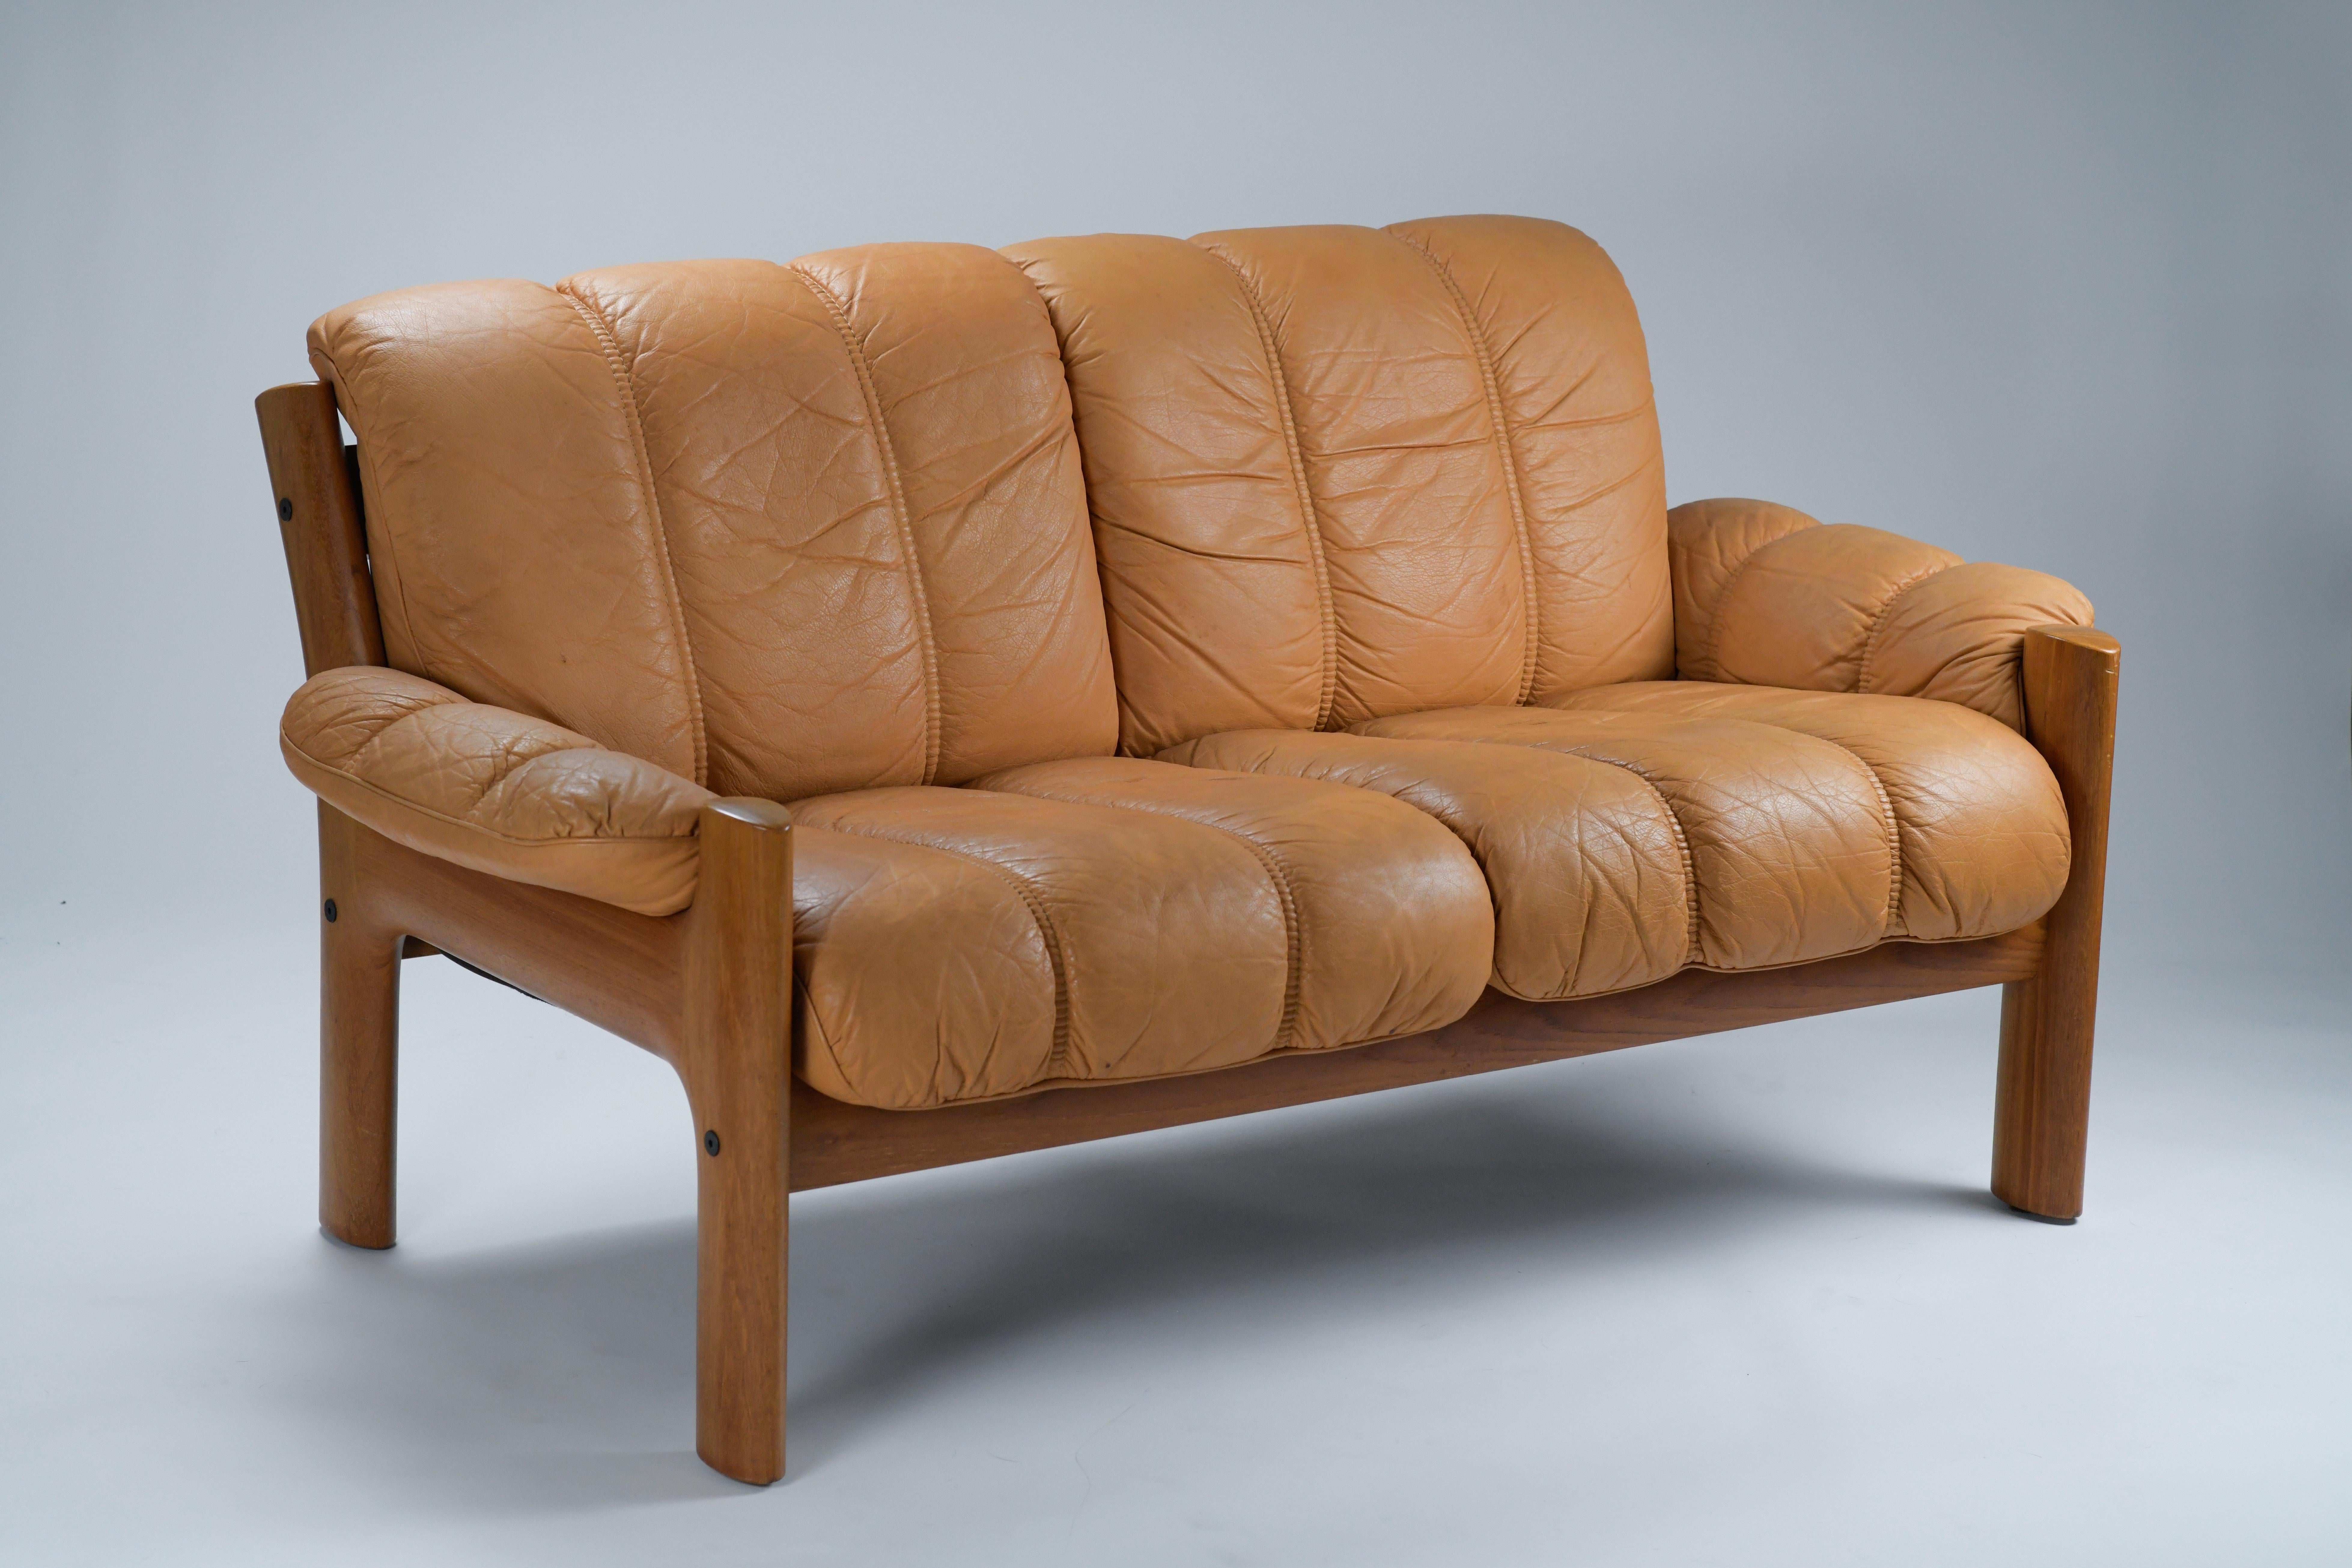 1970s mid century modern Burnt Orange leather loveseat by Ekornes. This two seaters sofa was designed and manufactured by Ekornes in Norway in the early 70s. This incredibly comfortable sofa has an organic profile with beautiful curves on its teak